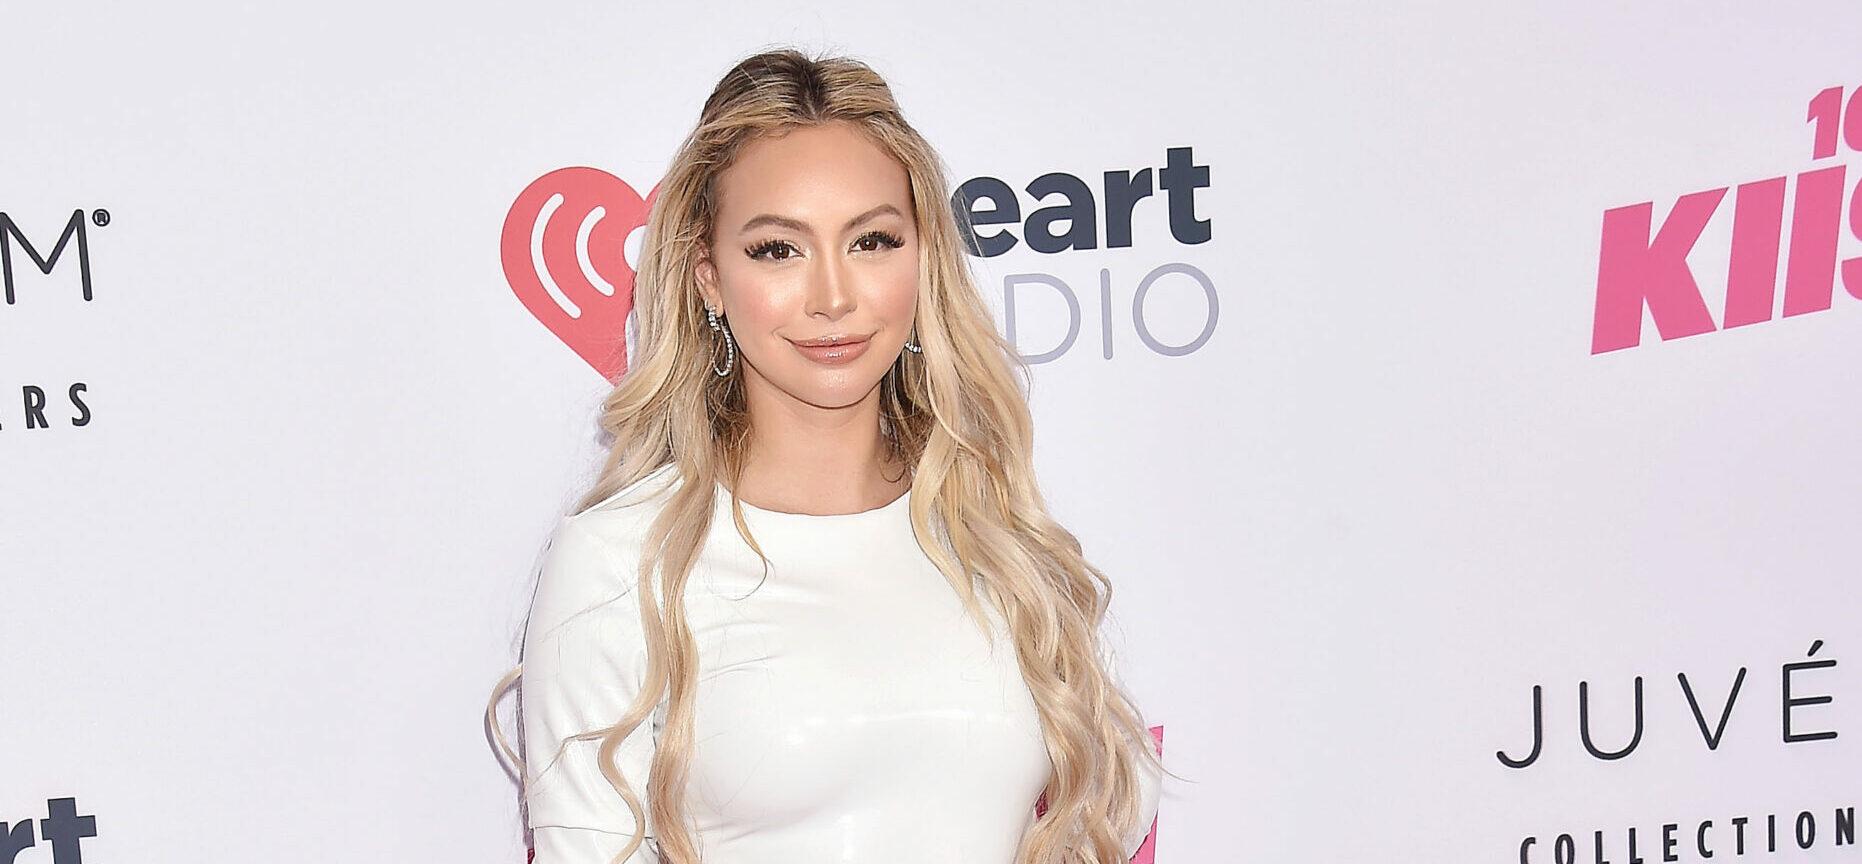 Corinne Olympios Asks ‘Hungry?’ As She Poses Topless And Bralass